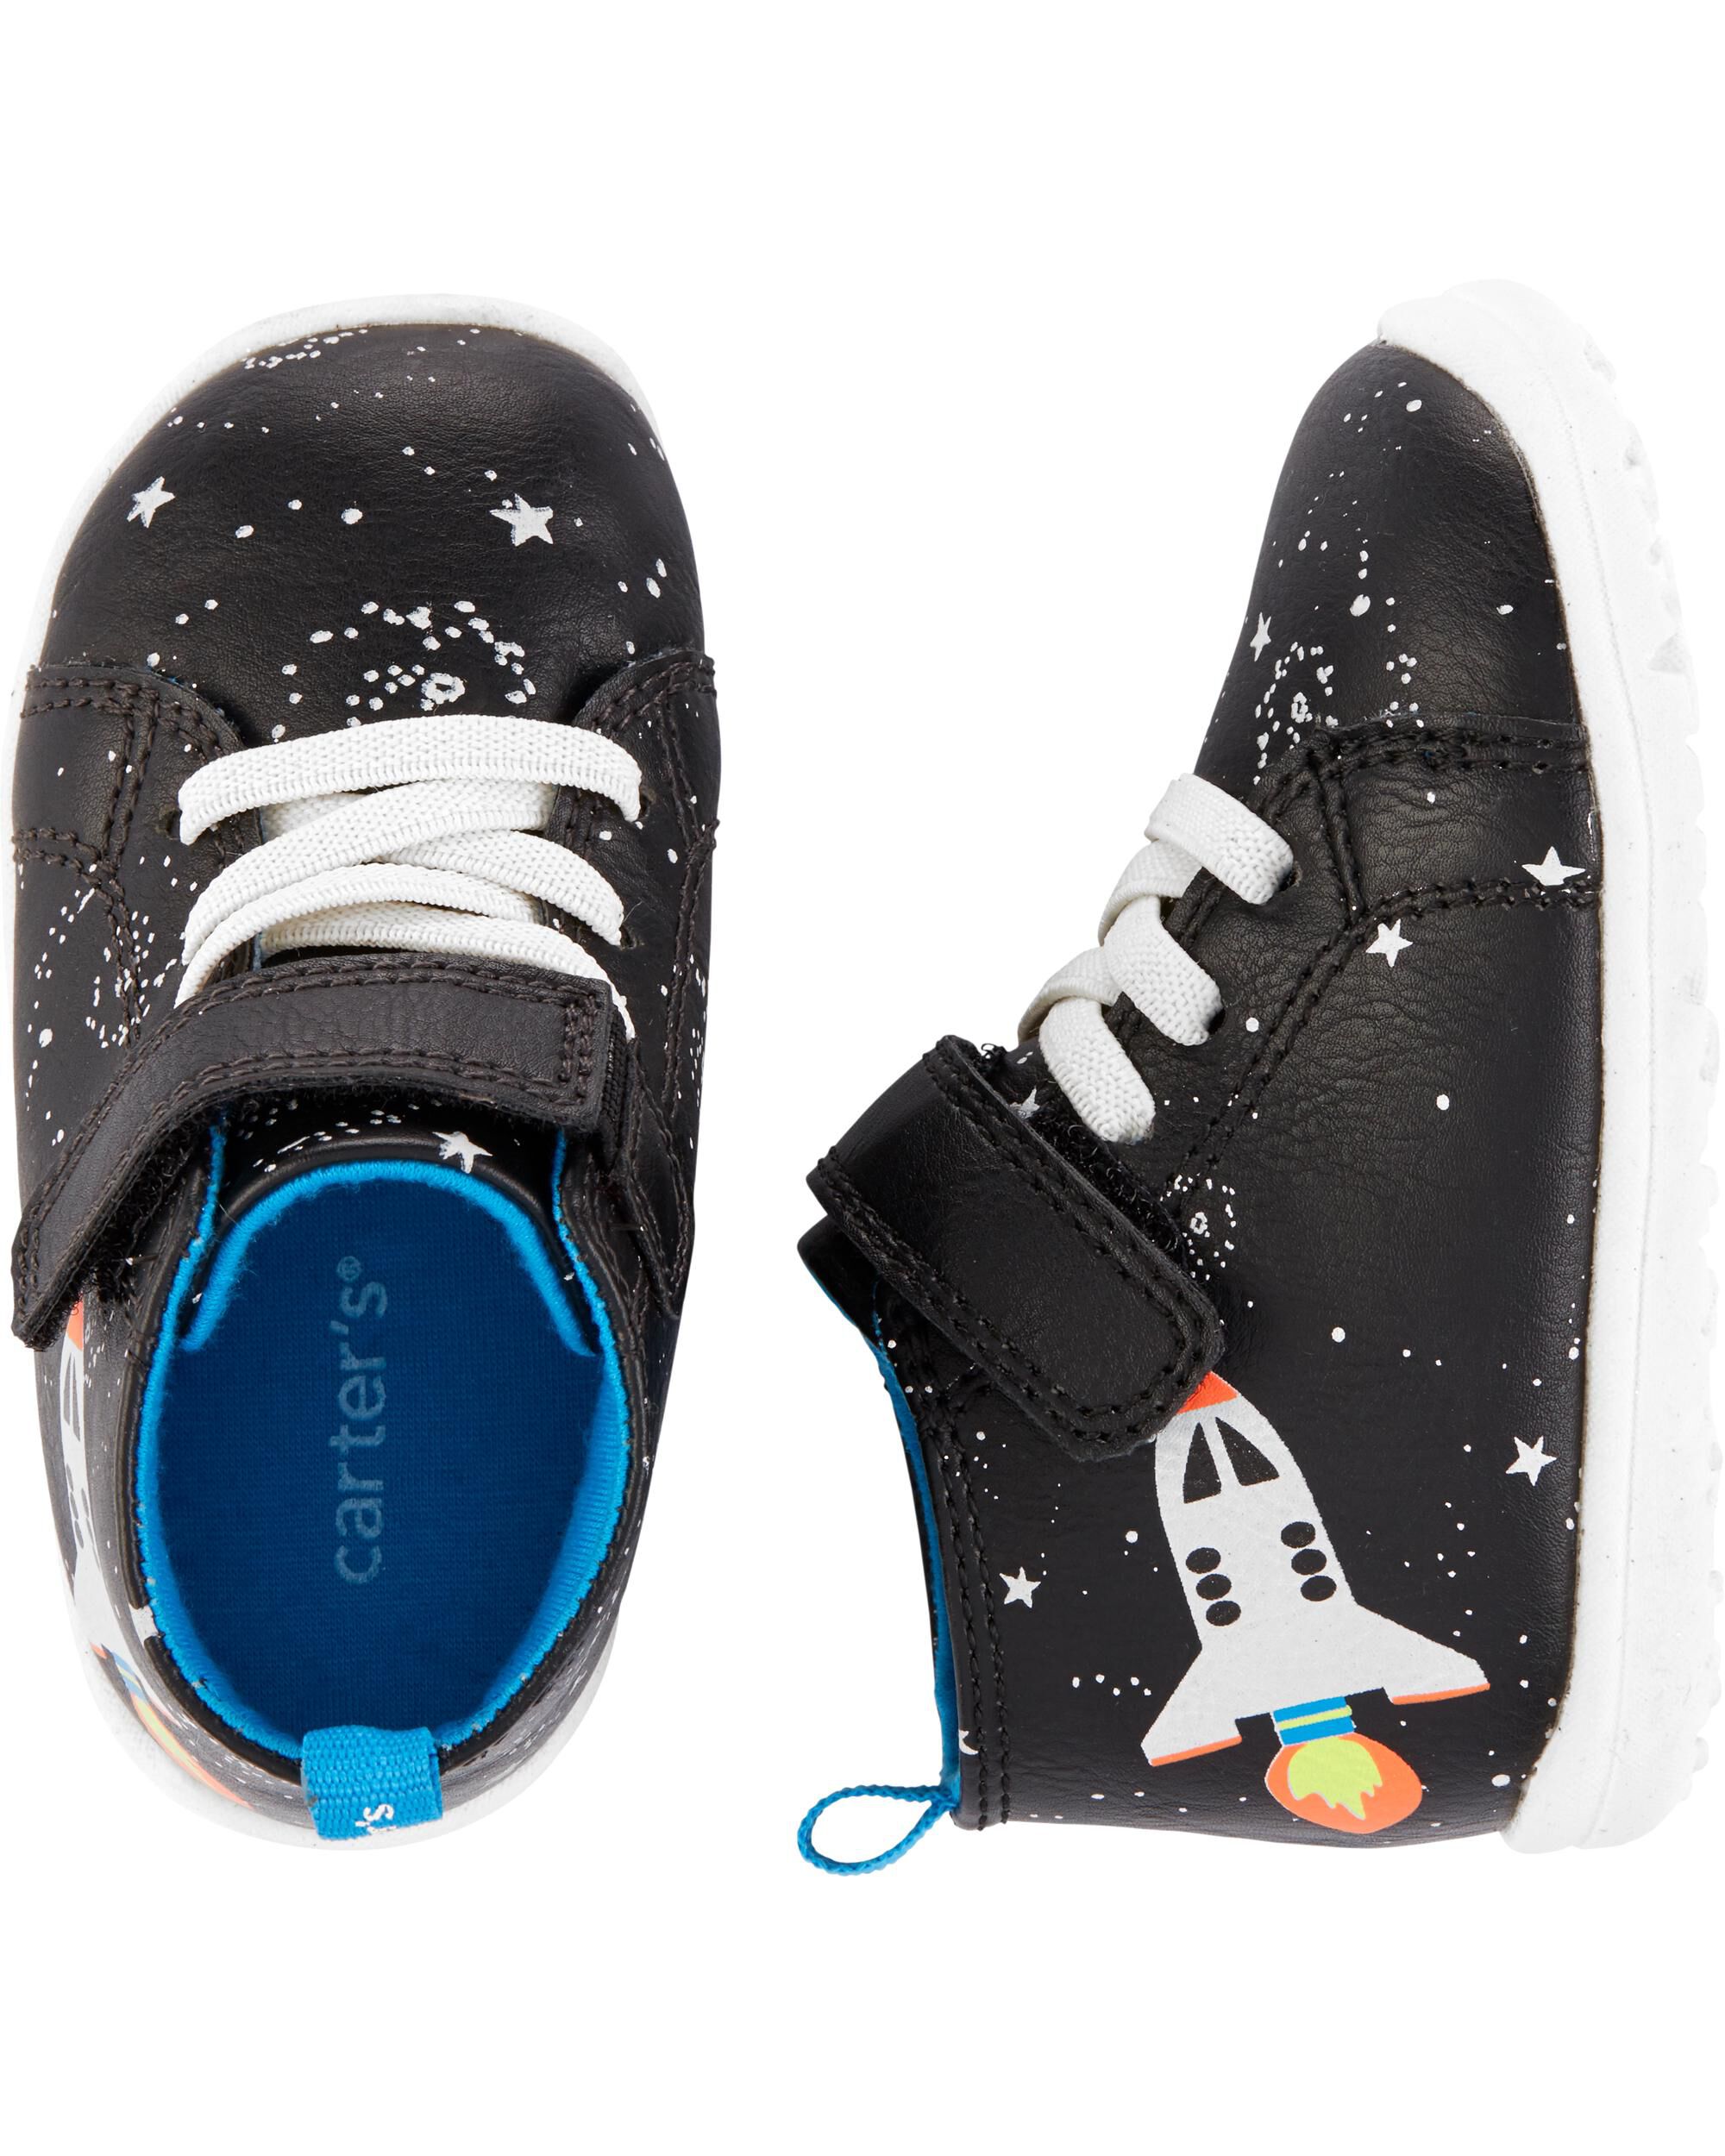 Carter's Every Step High Top Sneakers 